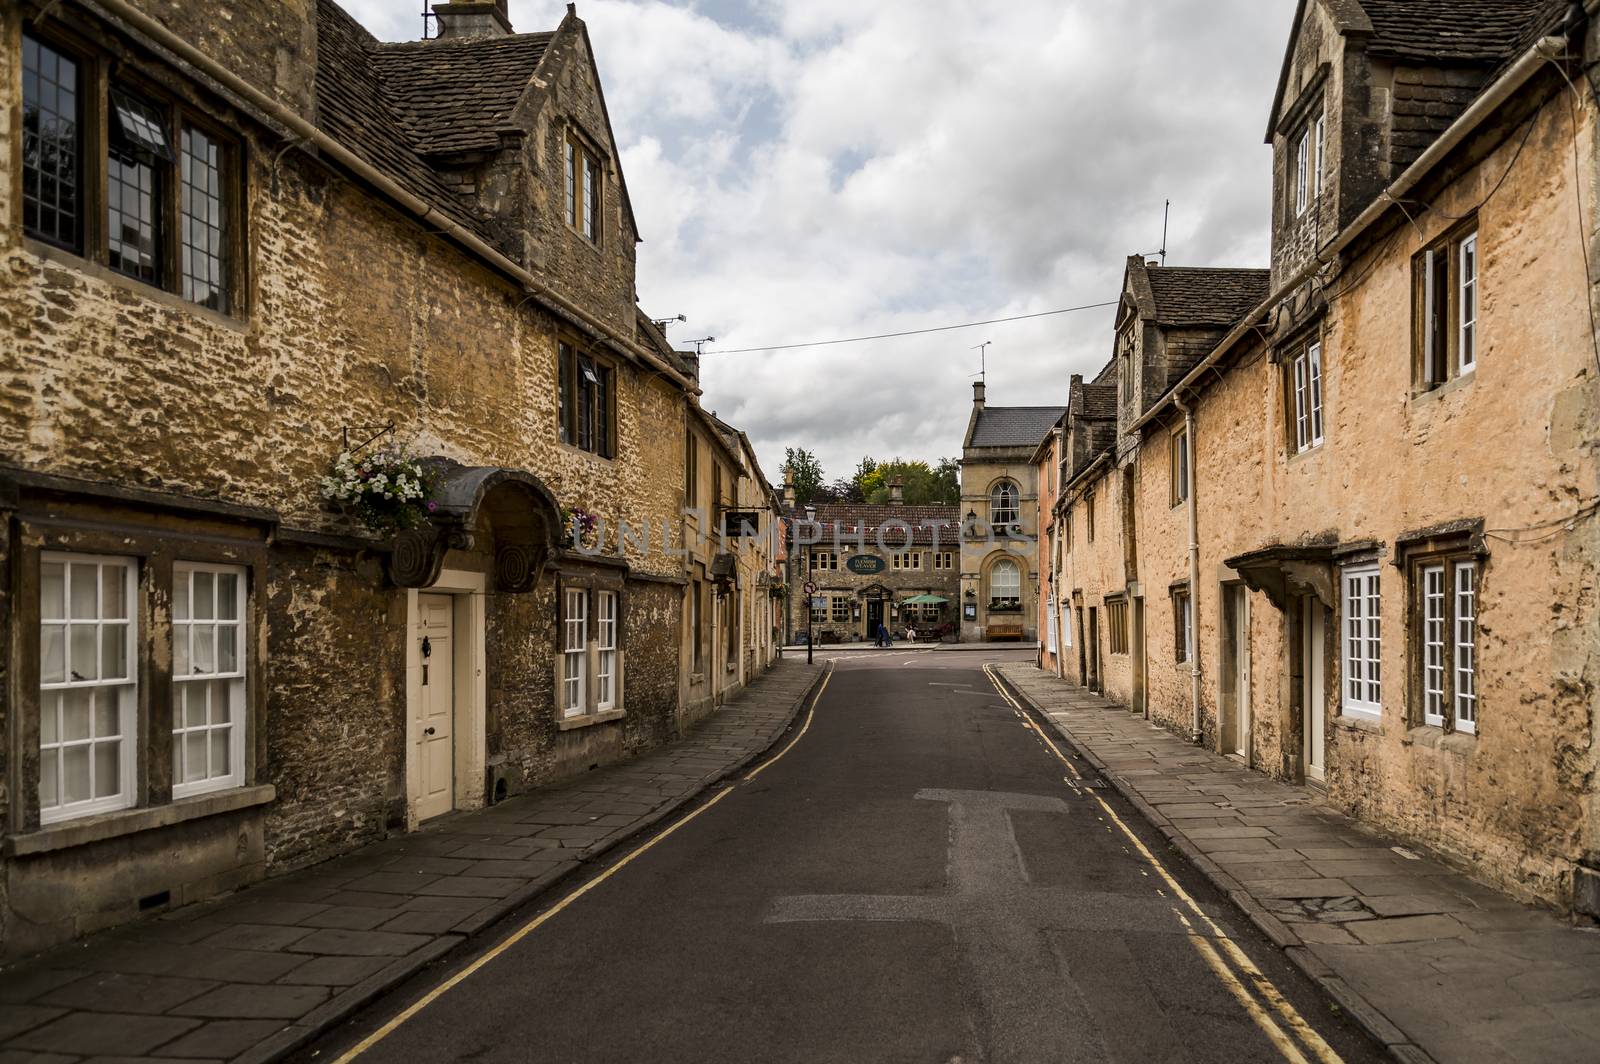 Street in the market town of Corsham England, UK, which was also used for the filming location of the BBC drama Poldark.